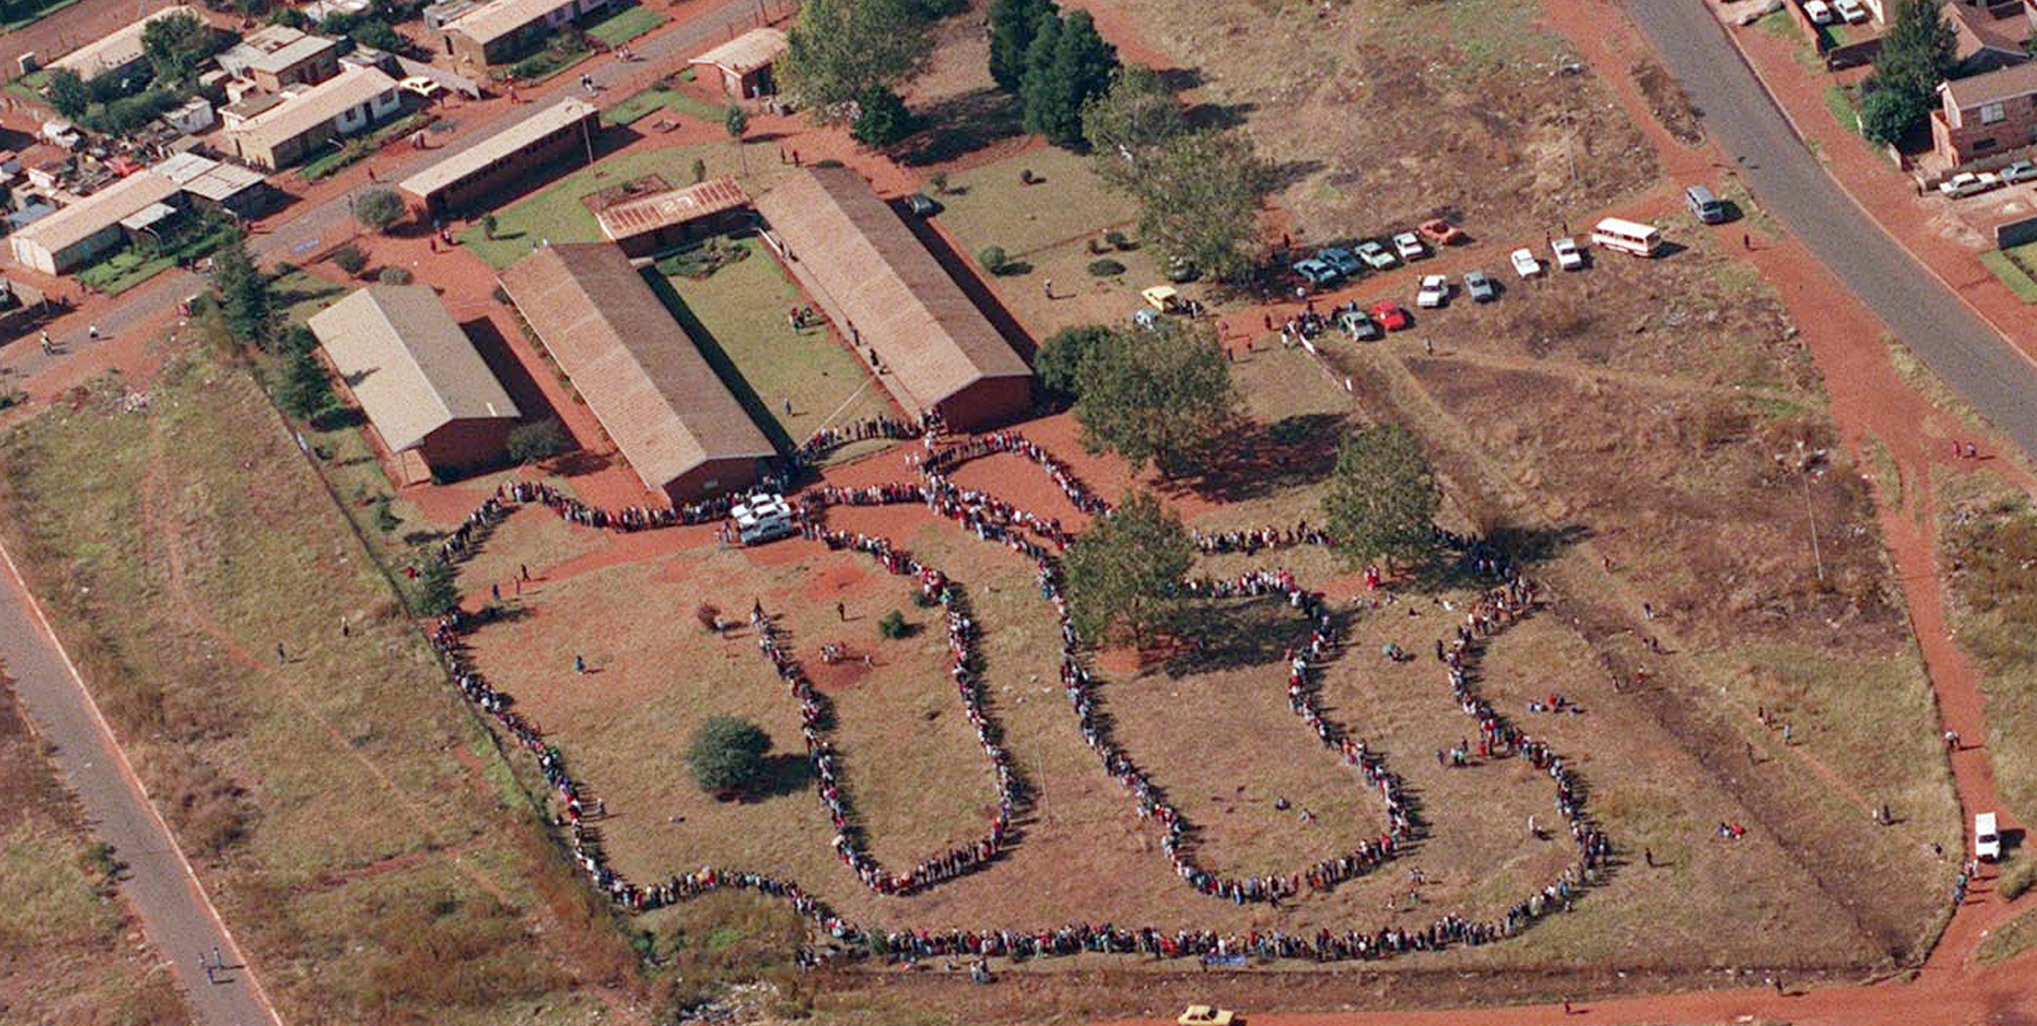 Queue of people in Soweto on 27.4.1994